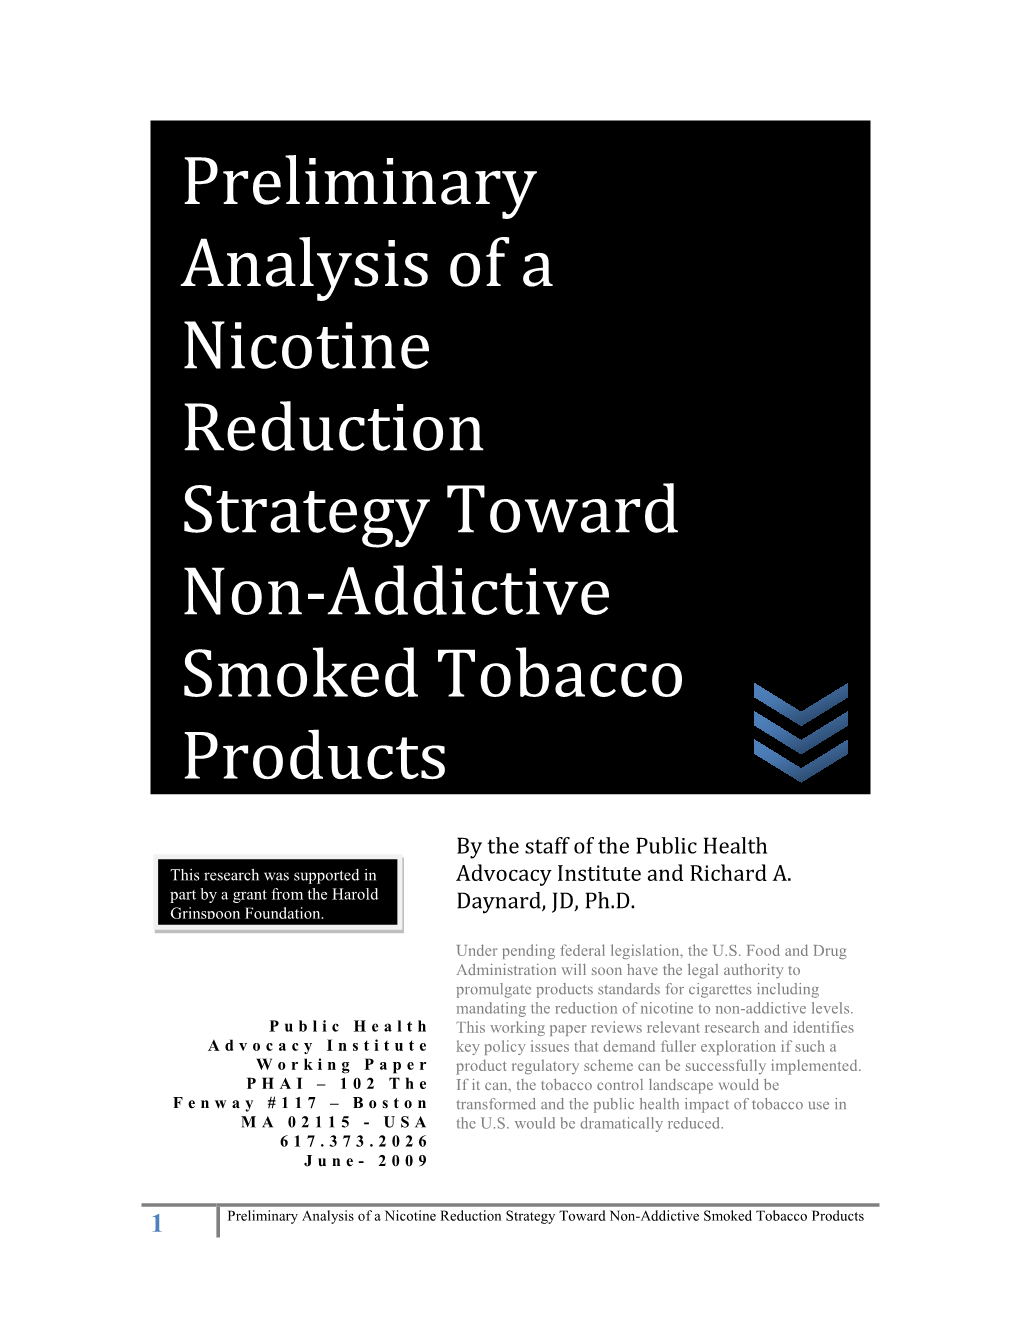 Preliminary Analysis of a Nicotine Reduction Strategy Toward Non-Addictive Smoked Tobacco Products